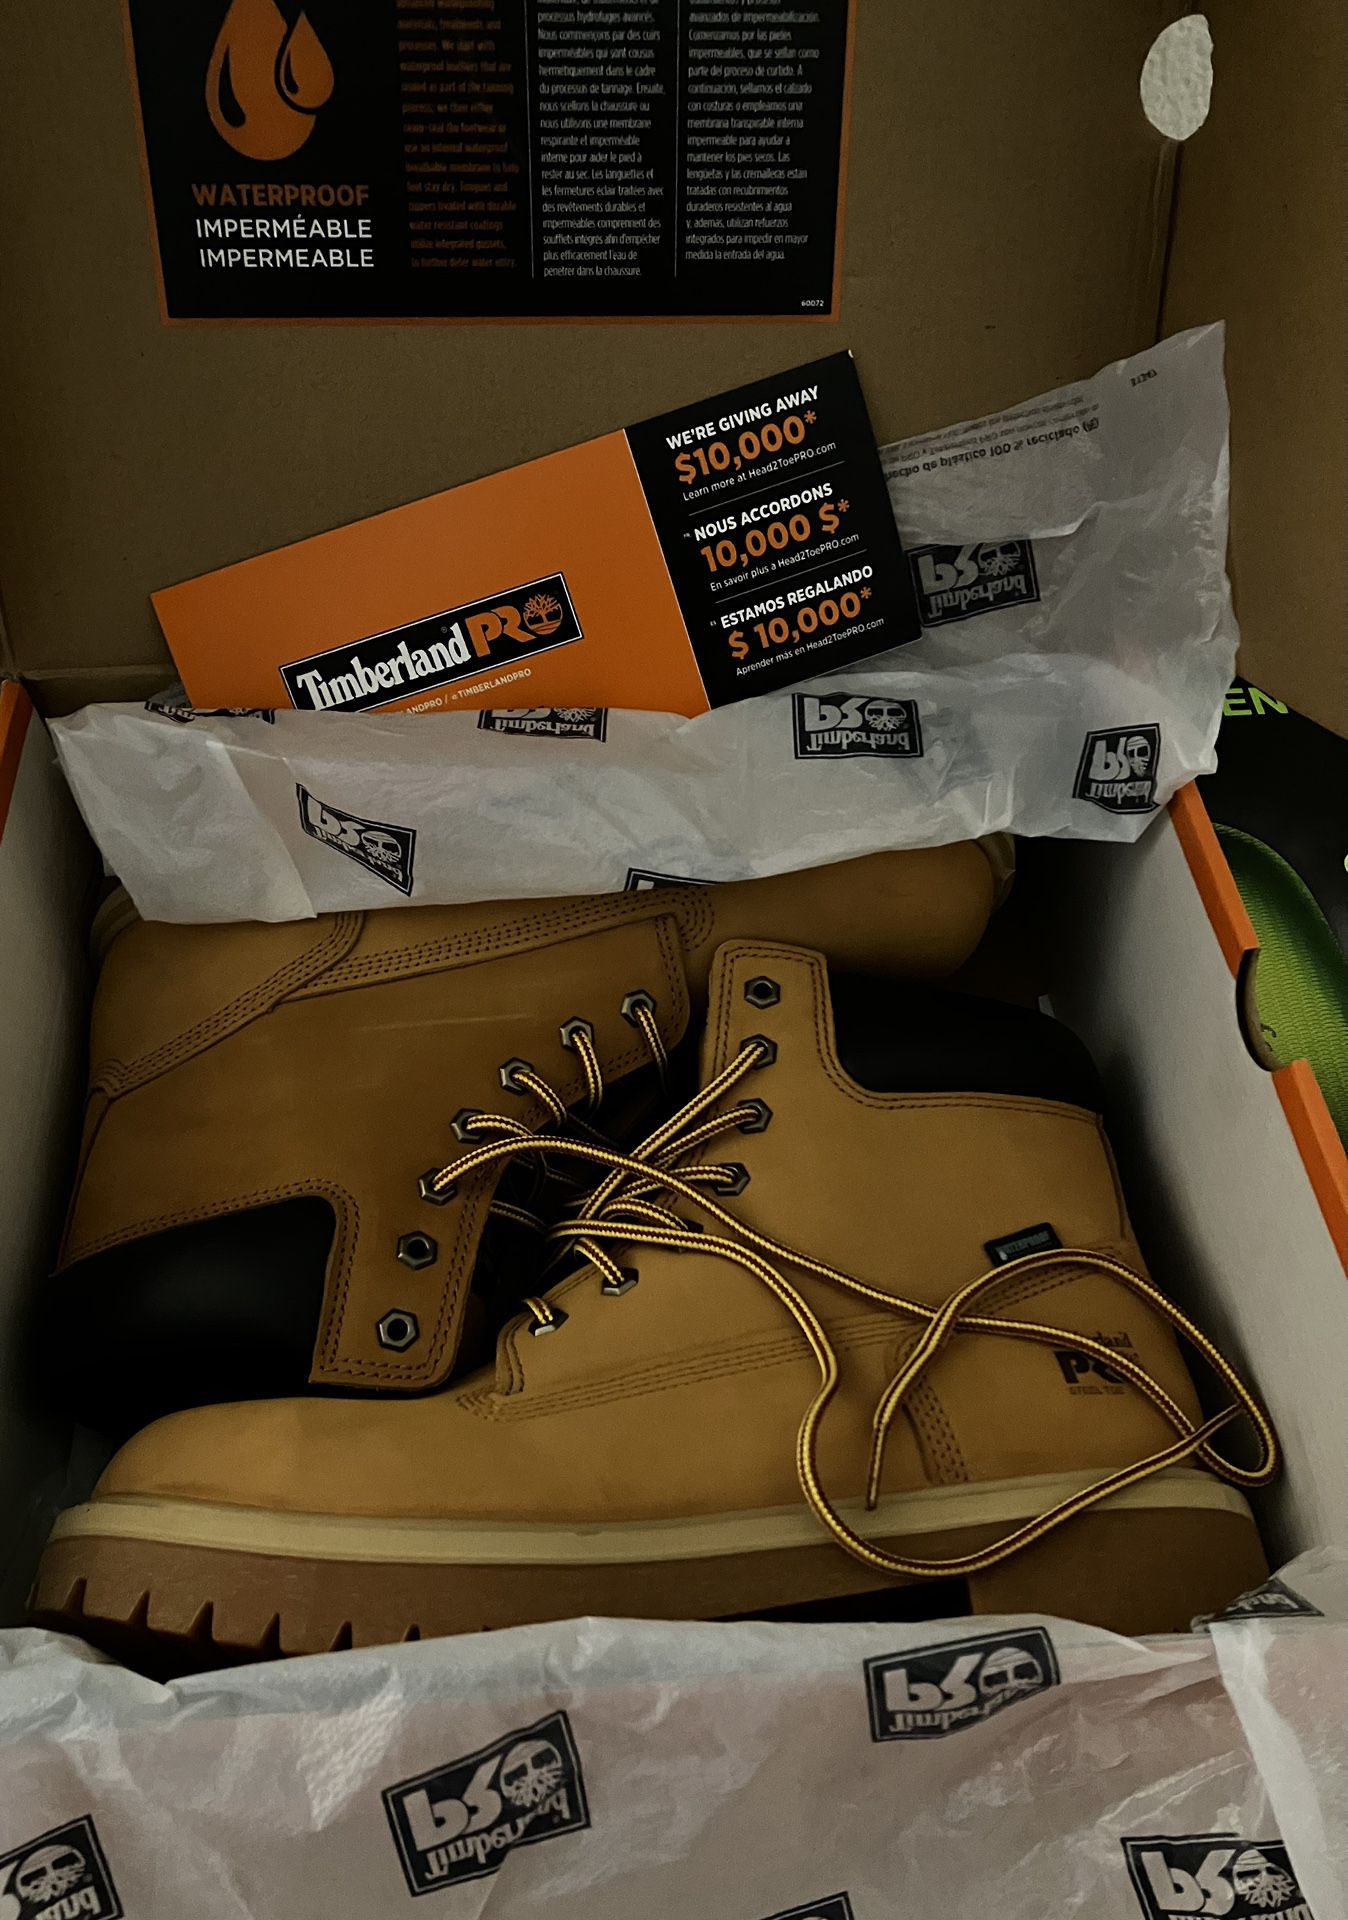 New Timberland Pro Work Boots w/ Expensive Inserts